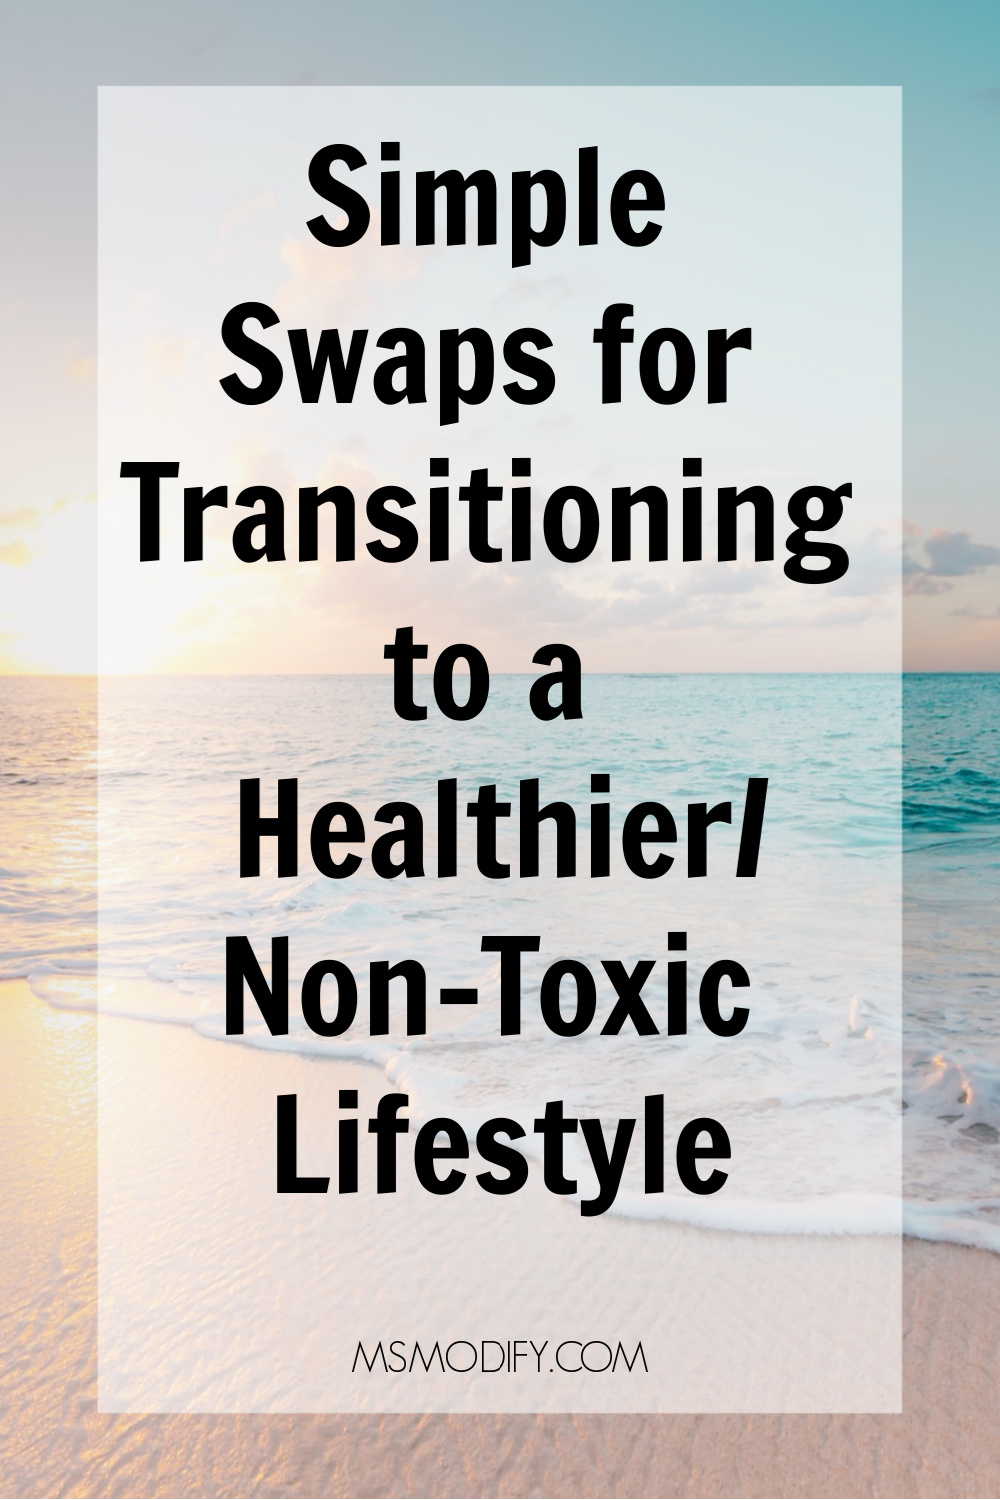 Simple Swaps for Transitioning to a Healthier Lifestyle